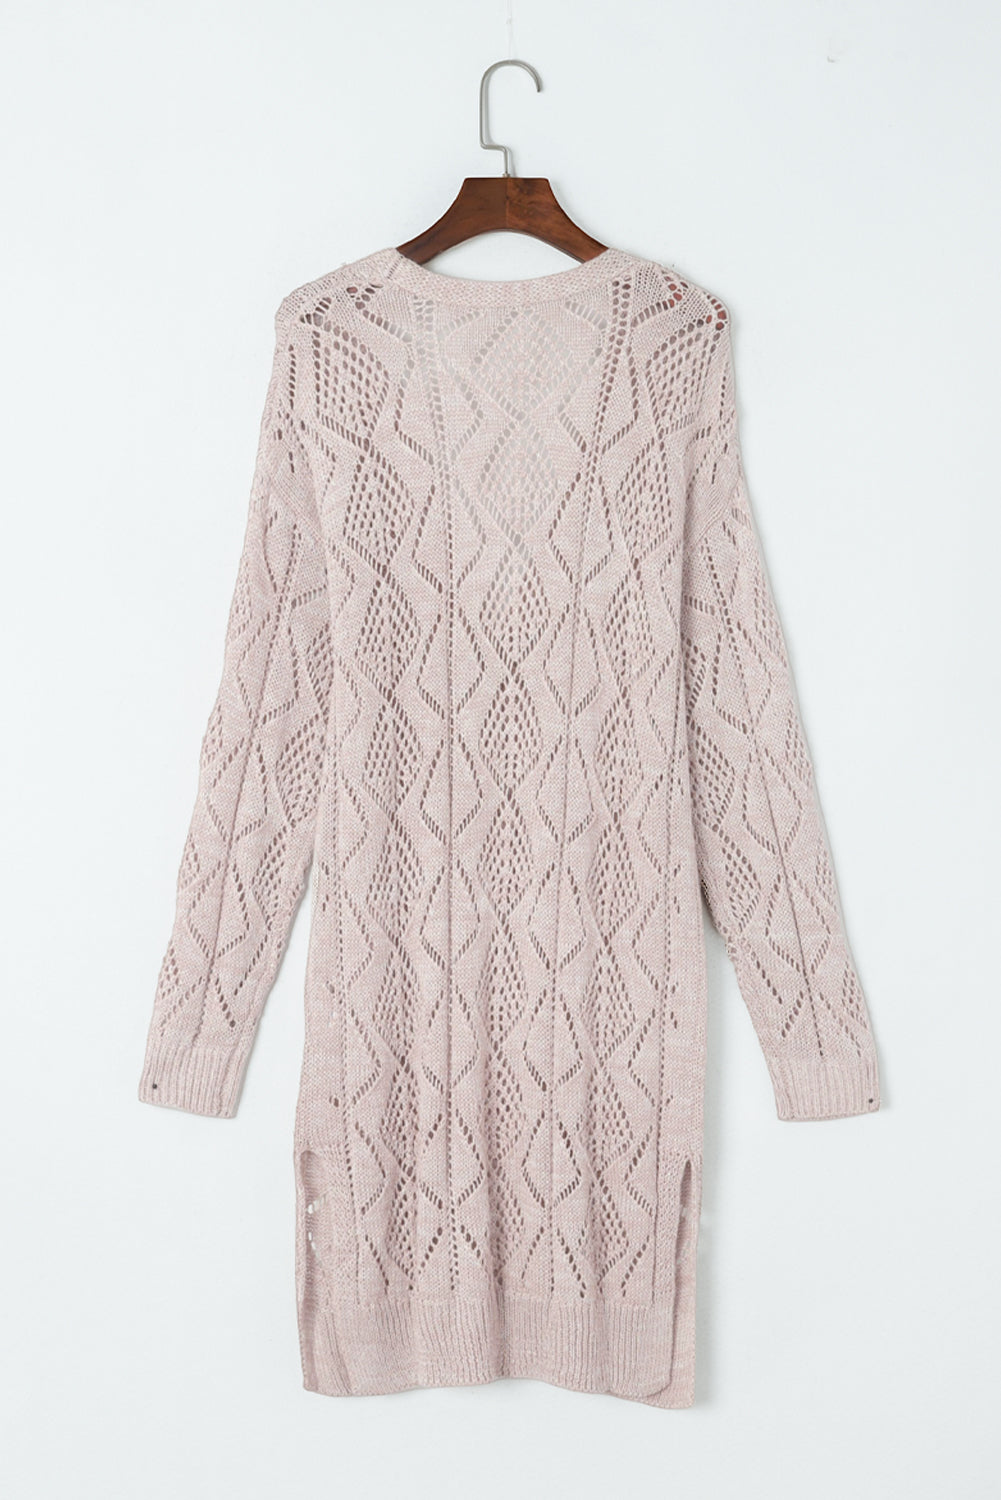 Khaki Hollow-out Openwork Knit Cardigan-9